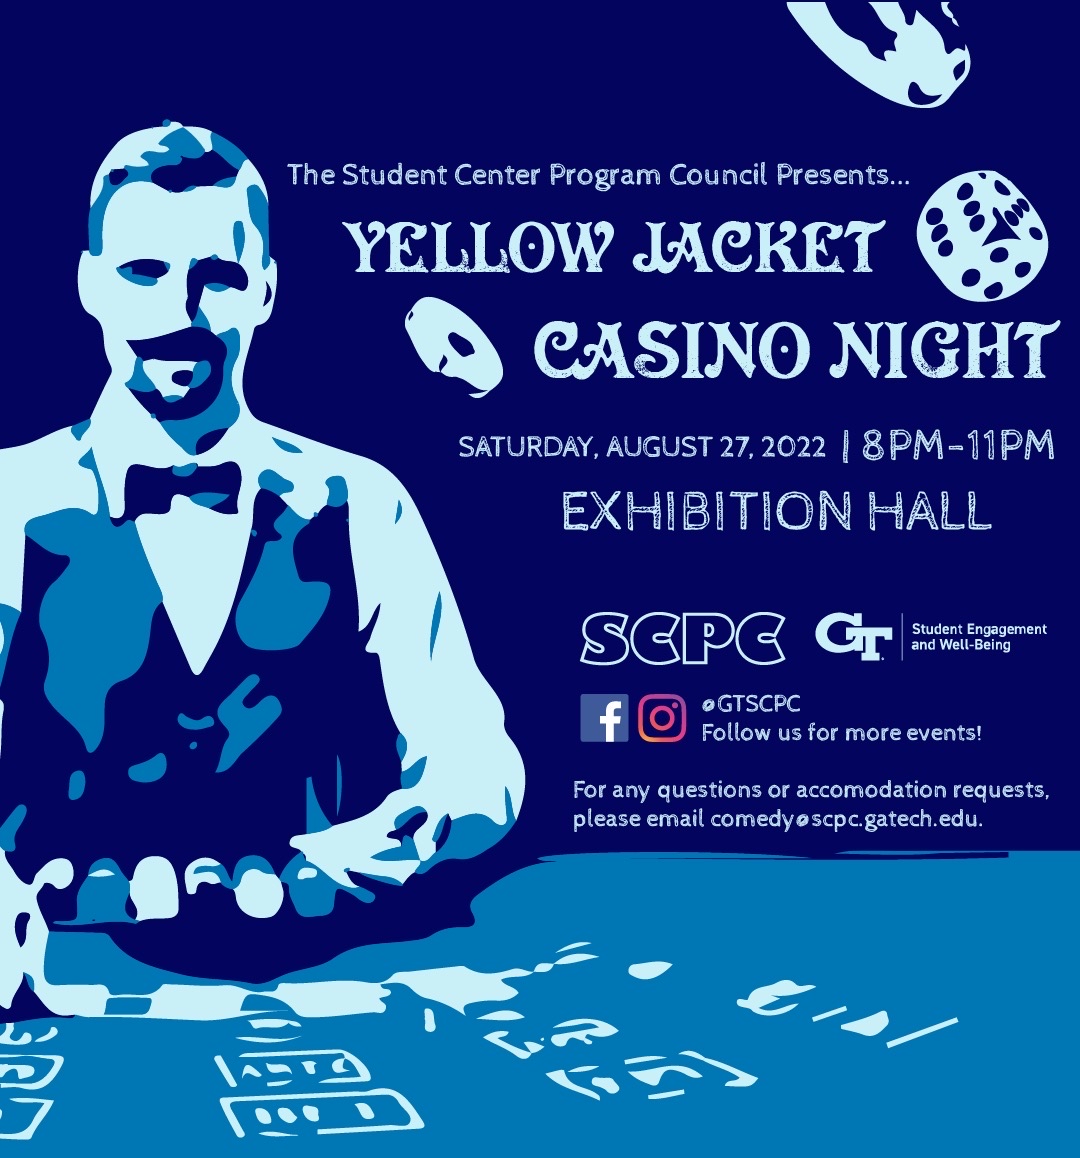 Yellow Jacket Casino Night is an event that will bring everyone's favorite casino games to campus. The event is on Saturday, August 27th from 8pm-11pm in the Exhibition Hall (Midtown rooms 1-4). Professional dealers will be hosting games of poker, bingo, blackjack, roulette, and many more! Also, earn raffle tickets; Aim to win more for chances to be gifted tickets to Georgia Tech Night at Six Flags and free games of bowling at the Student Center! It will be a great opportunity to meet other students at the